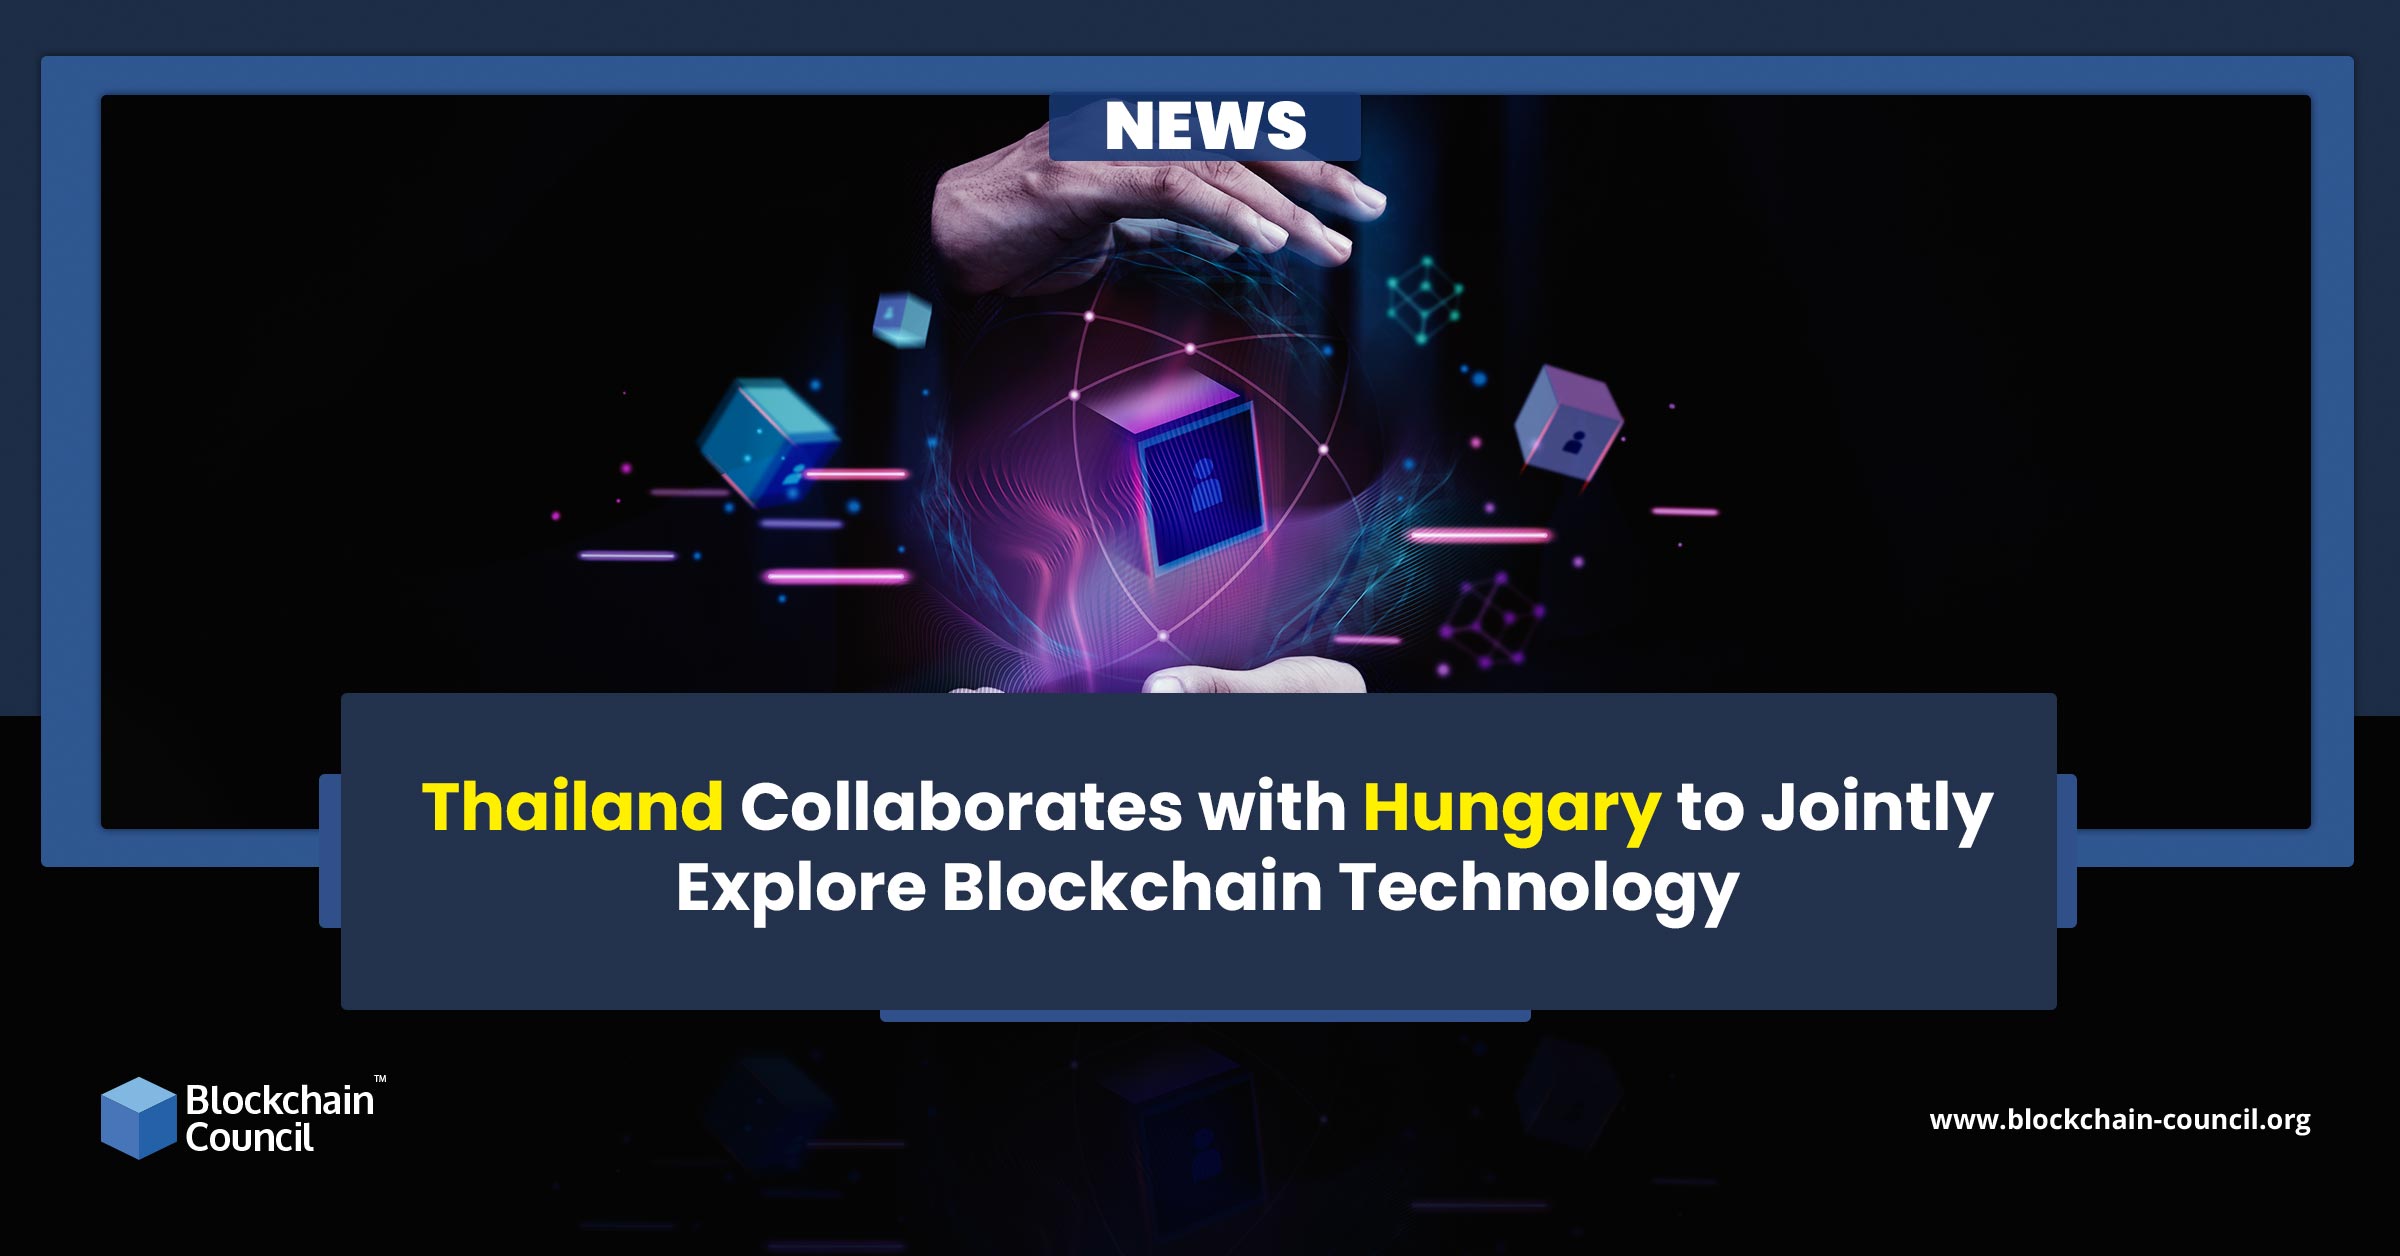 Thailand Collaborates with Hungary to Jointly Explore Blockchain Technology